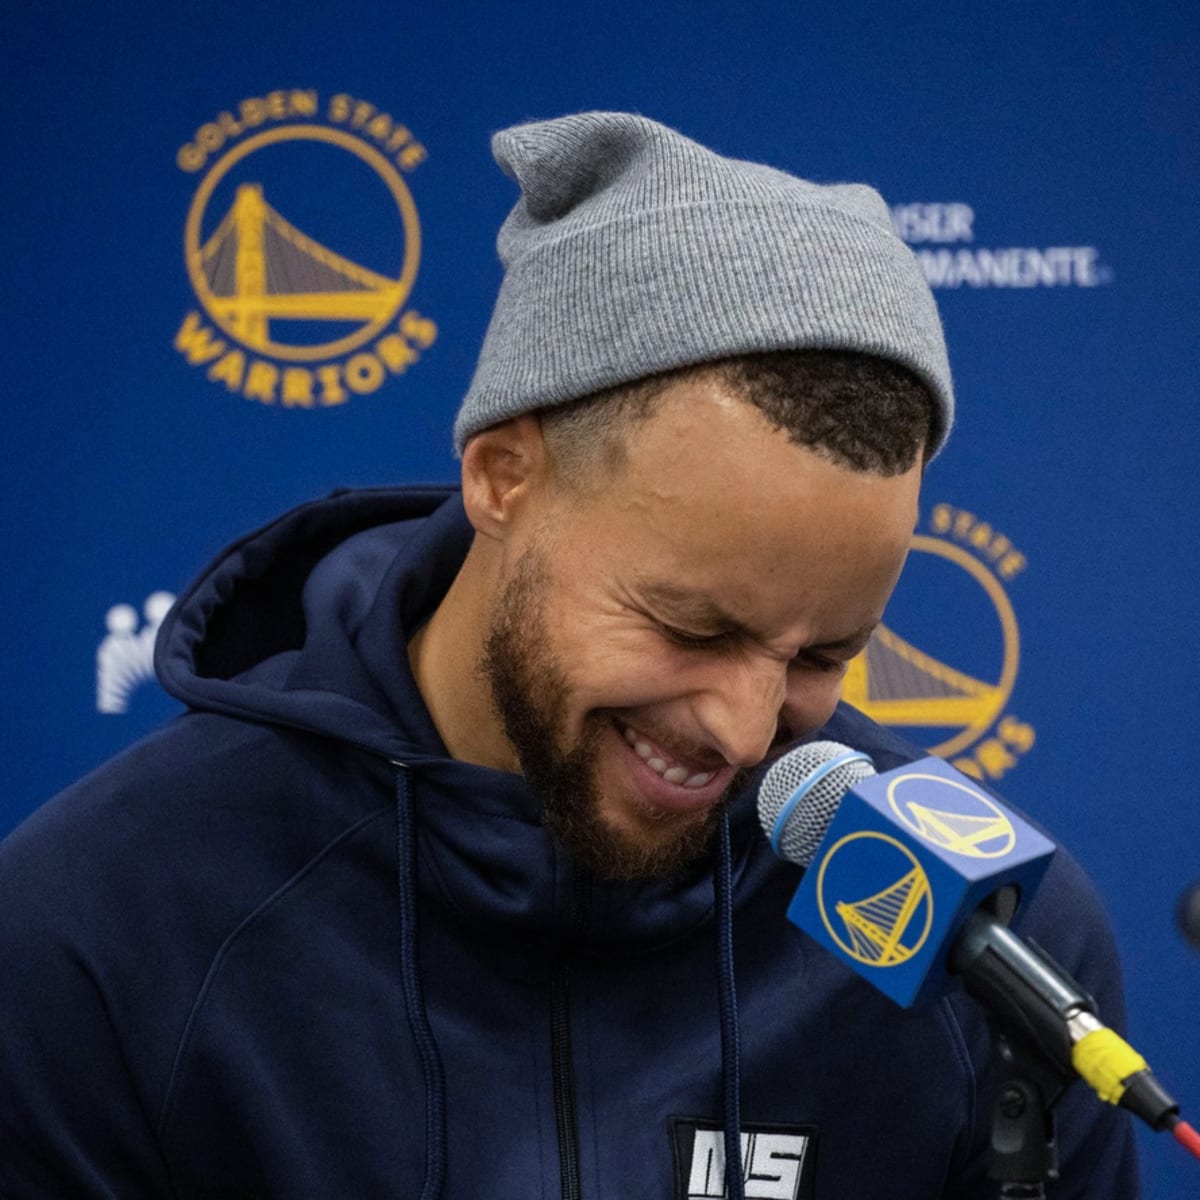 Steph Curry amused by parents' dueling rooting interests – The Denver Post